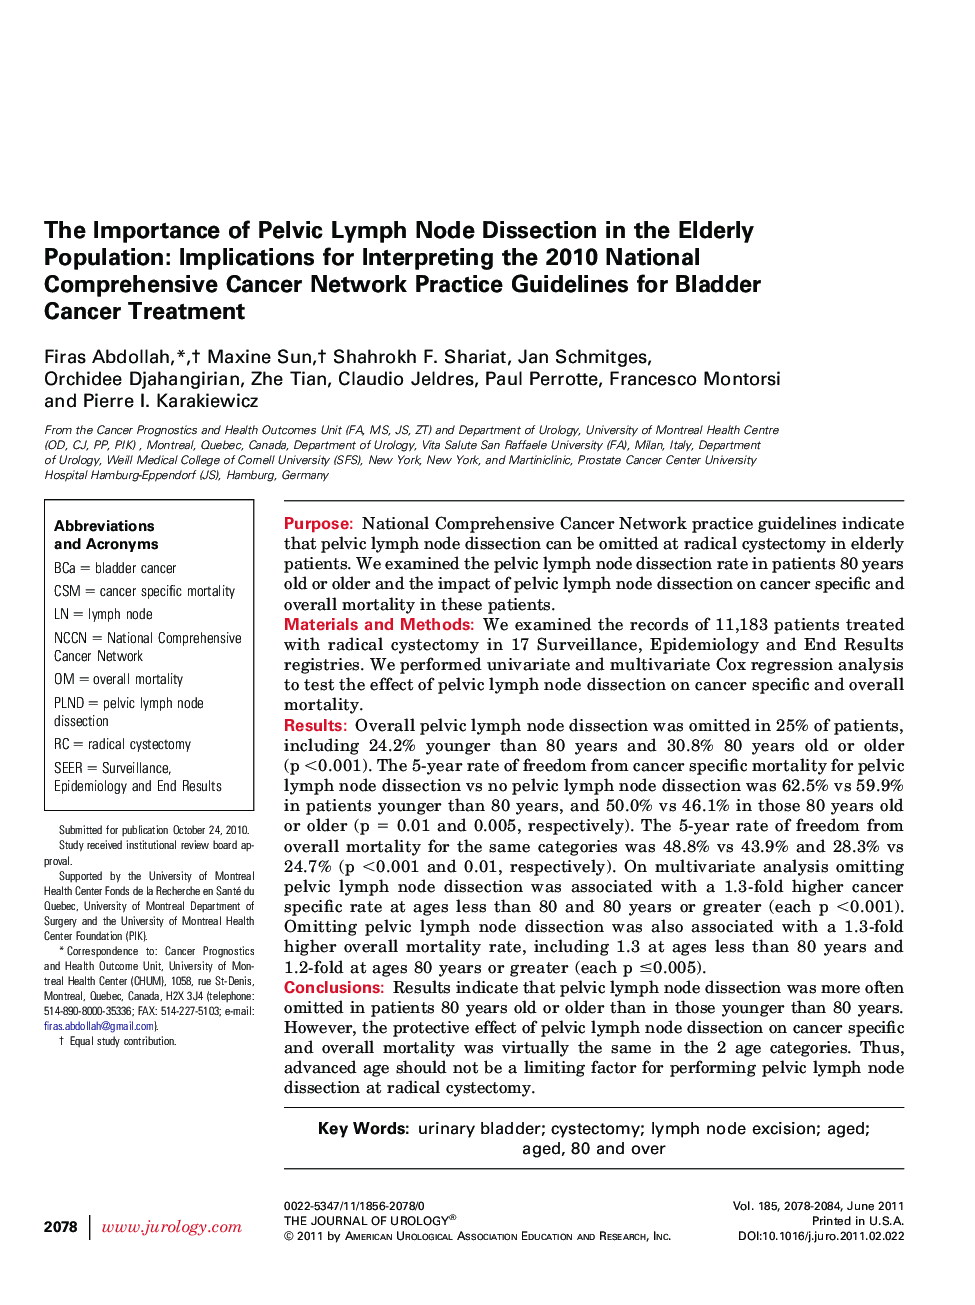 The Importance of Pelvic Lymph Node Dissection in the Elderly Population: Implications for Interpreting the 2010 National Comprehensive Cancer Network Practice Guidelines for Bladder Cancer Treatment 